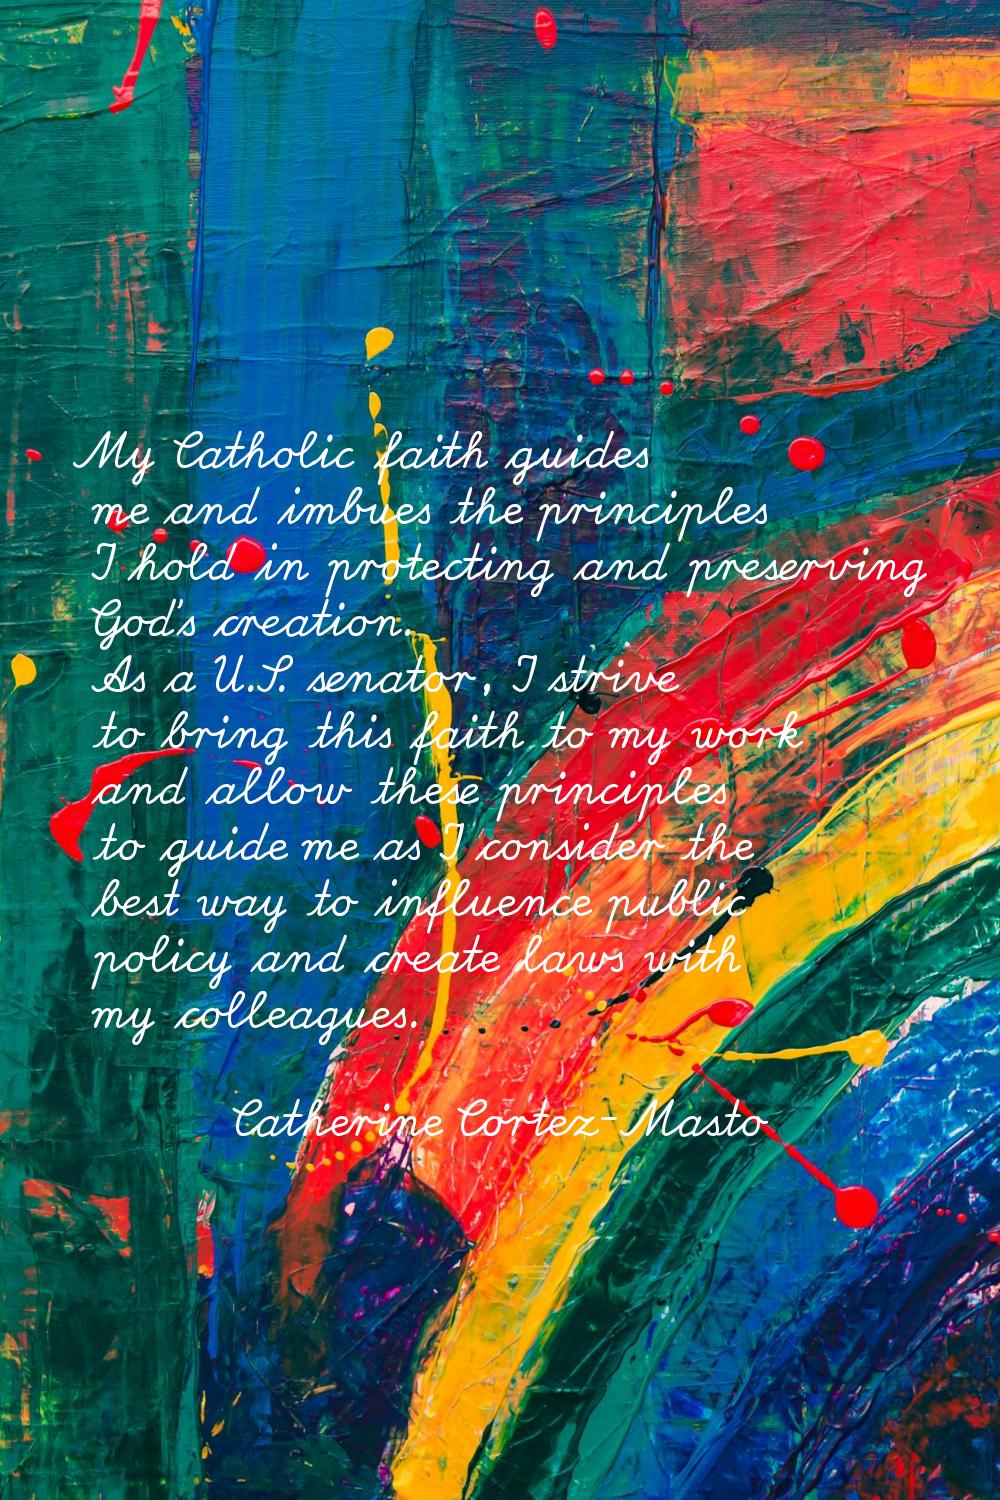 My Catholic faith guides me and imbues the principles I hold in protecting and preserving God's cre